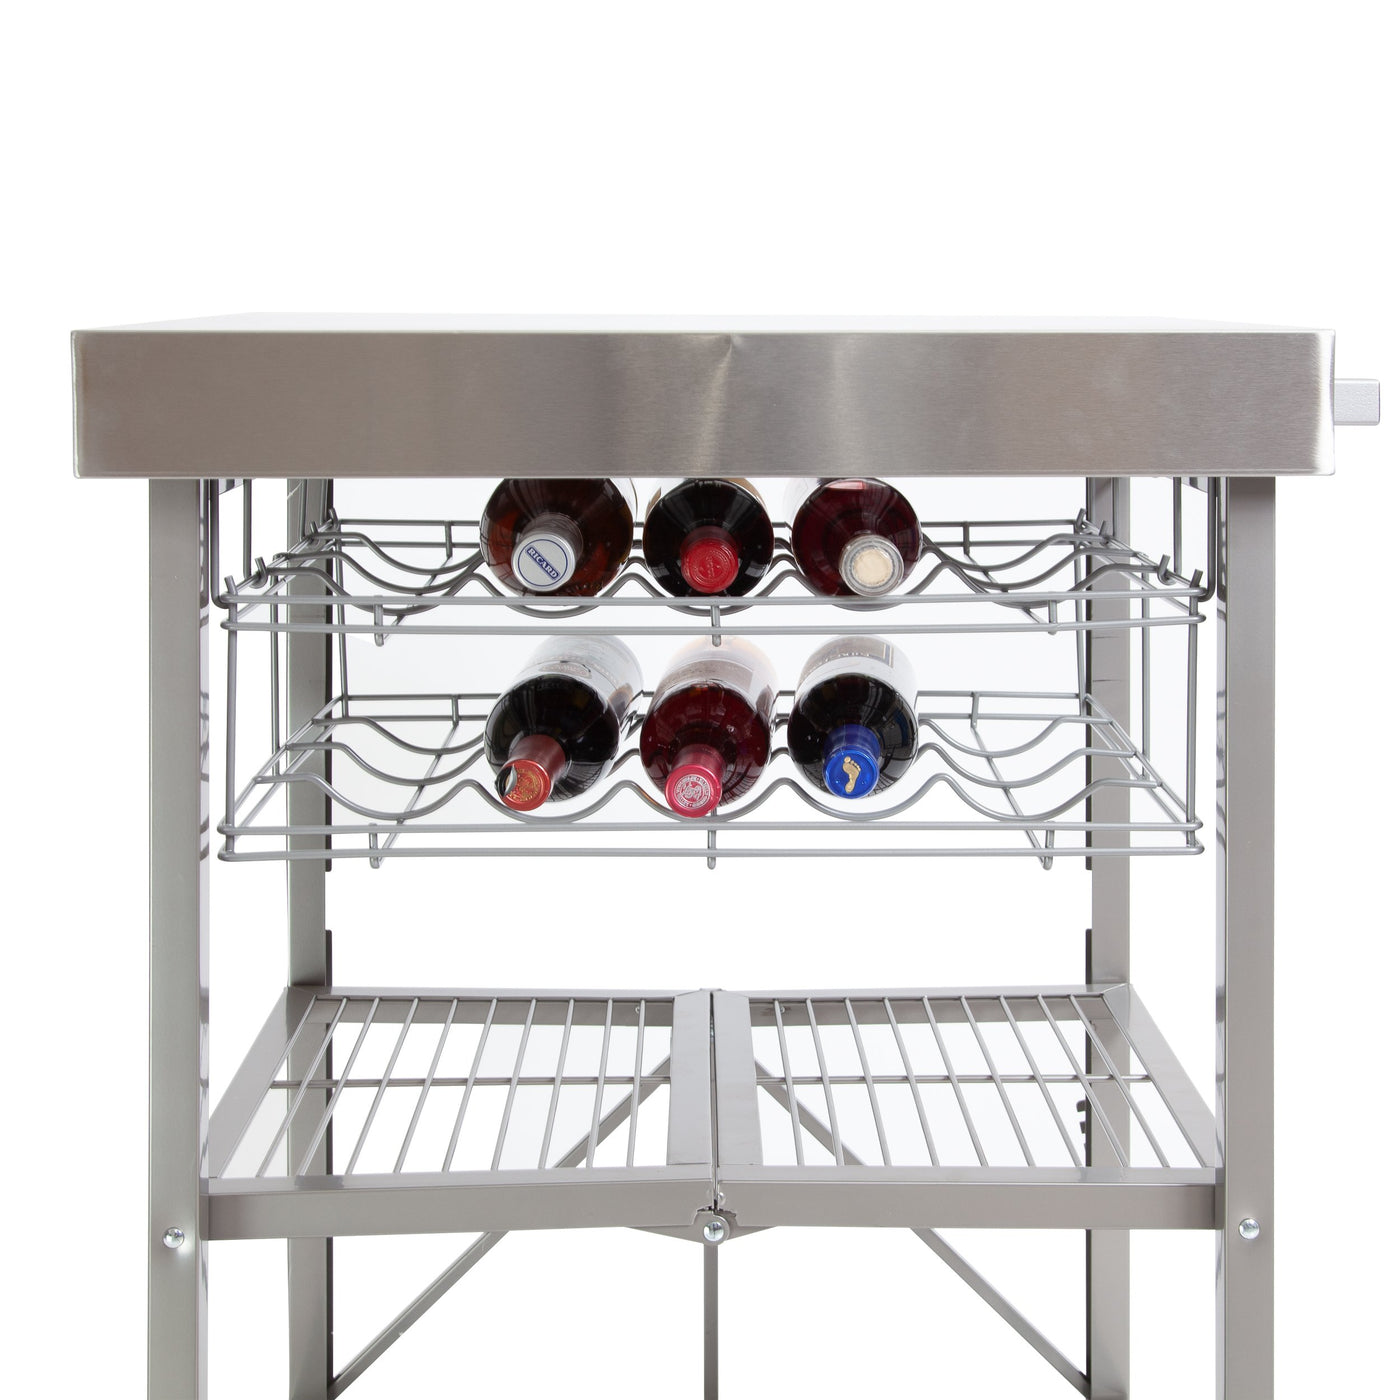 THE RBT - FULLY STAINLESS STEEL FOLDABLE KITCHEN CART WITH WHEELS